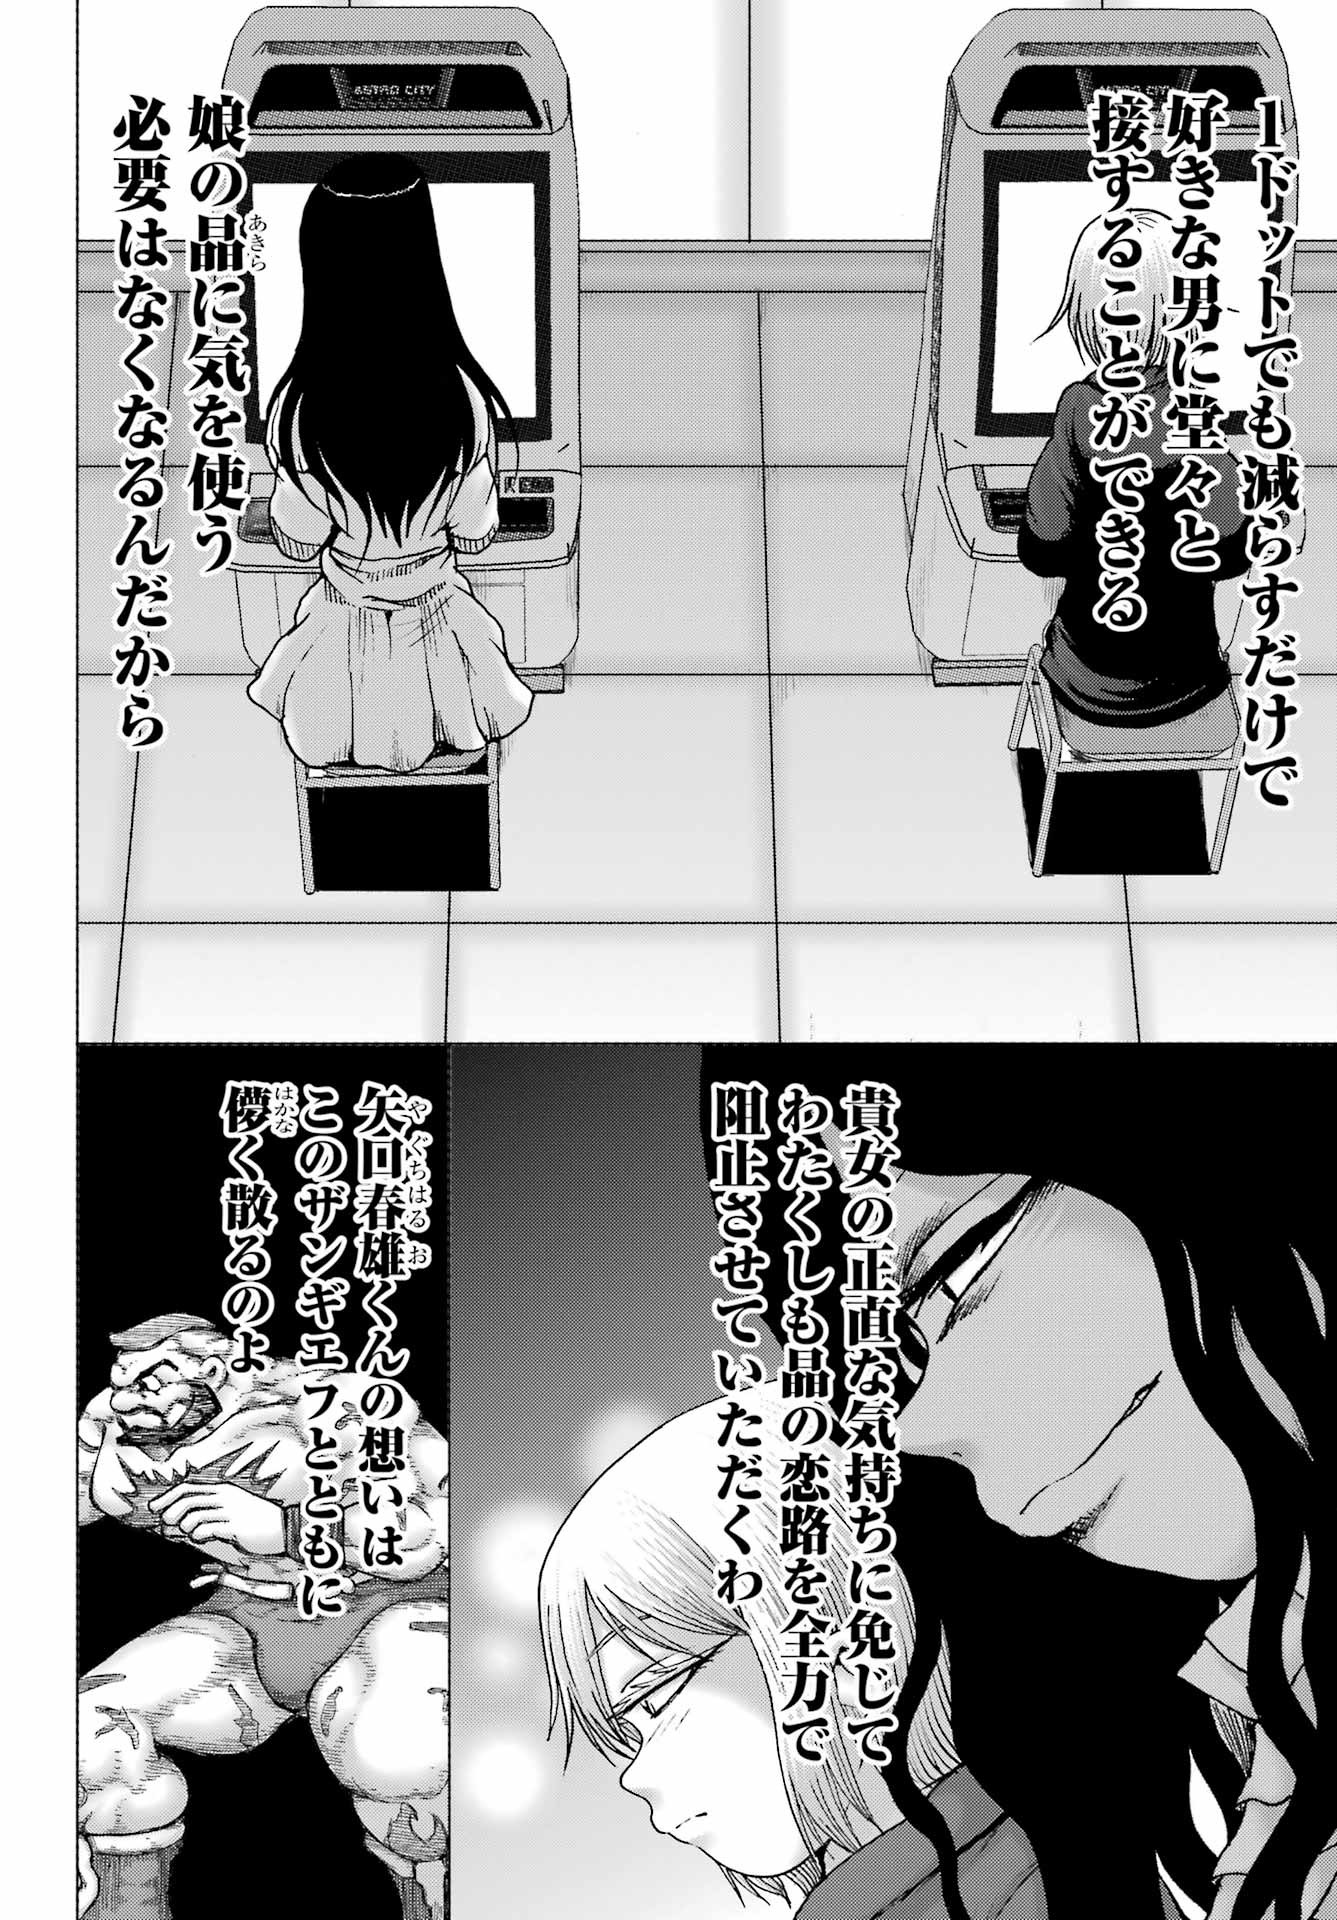 High Score Girl DASH - Chapter 36 - Page 4